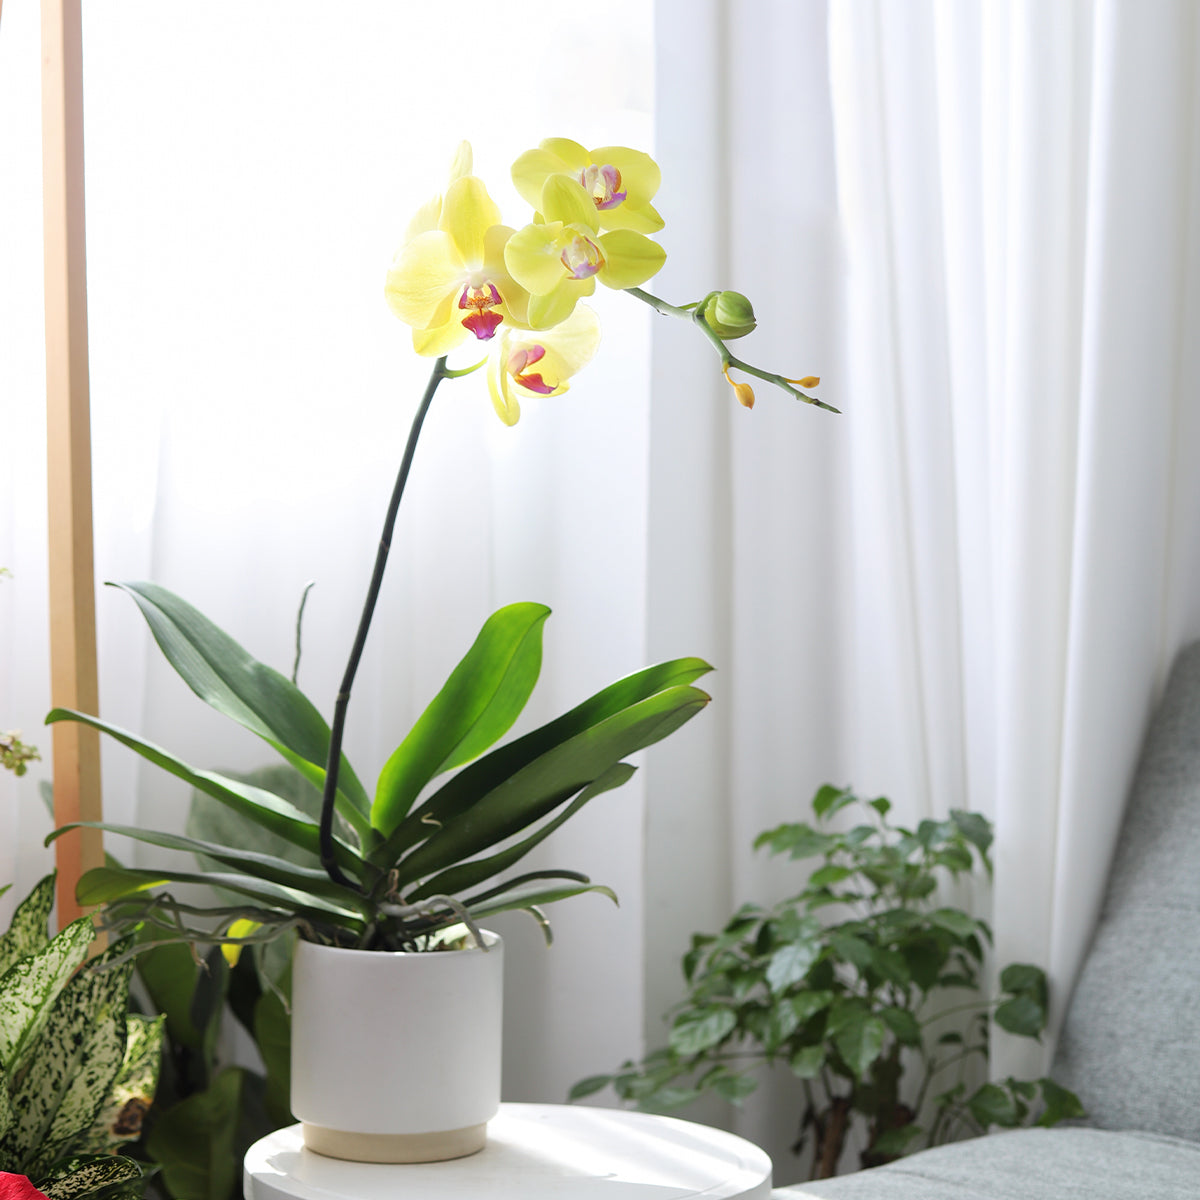 orchid plants, orchid pot, orchid, orchid flowers, orchid pots with holes, live orchid plants, phalaenopsis orchid, yellow orchid flowers